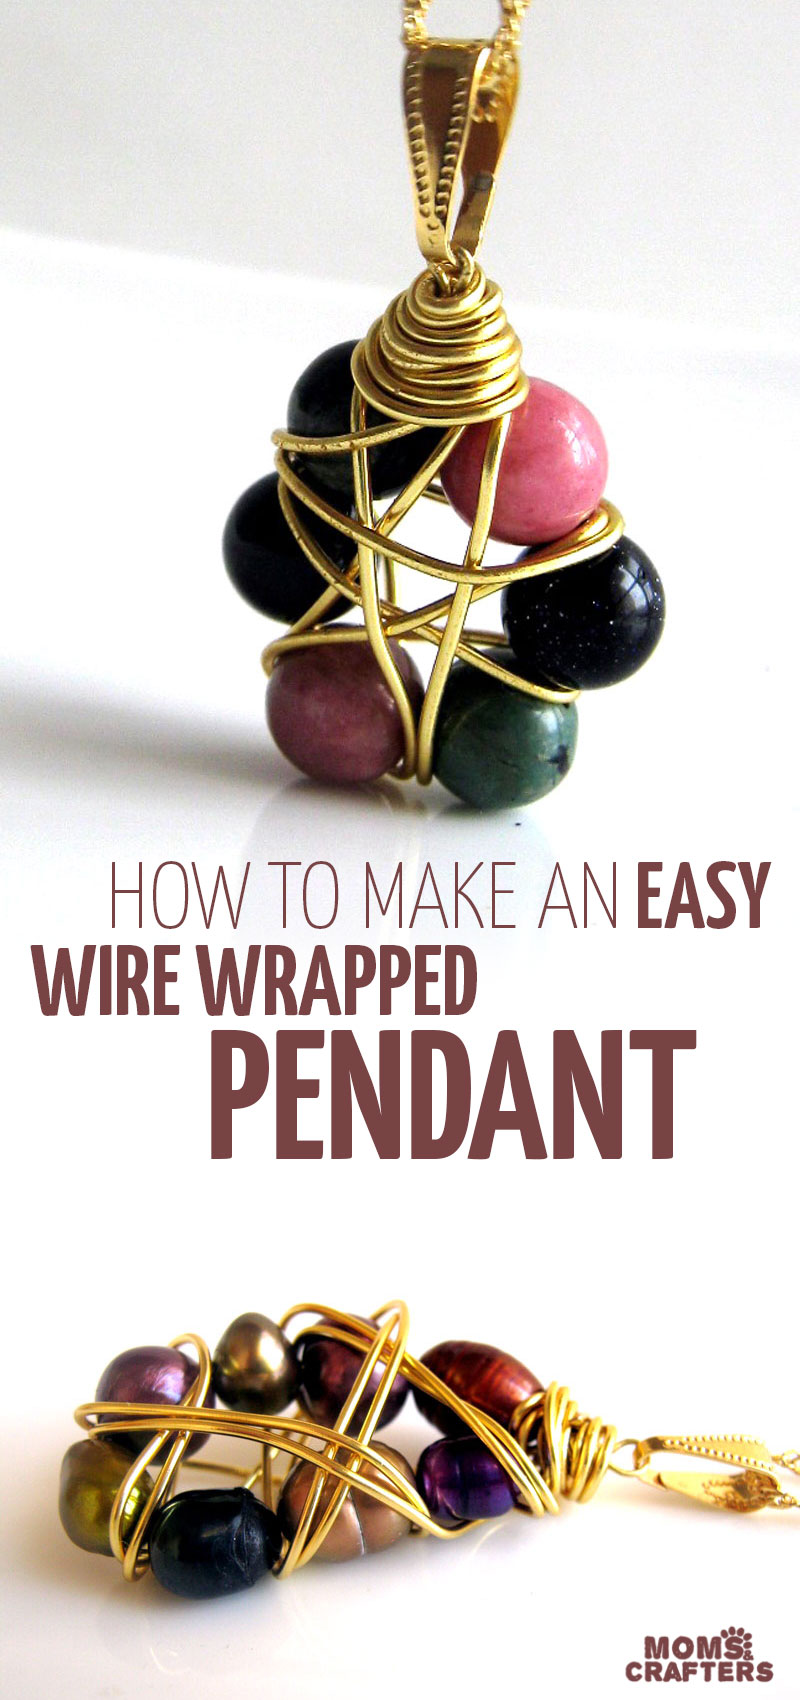 Click to learn how to make simple wire wrapped pendants - tutorial for beginners. These easy jewelry making wire wrapping ideas have a boho vibe and are perfect for learning new techniques - even if you know nothing! #jewelrymaking #pendants #wirewrapping